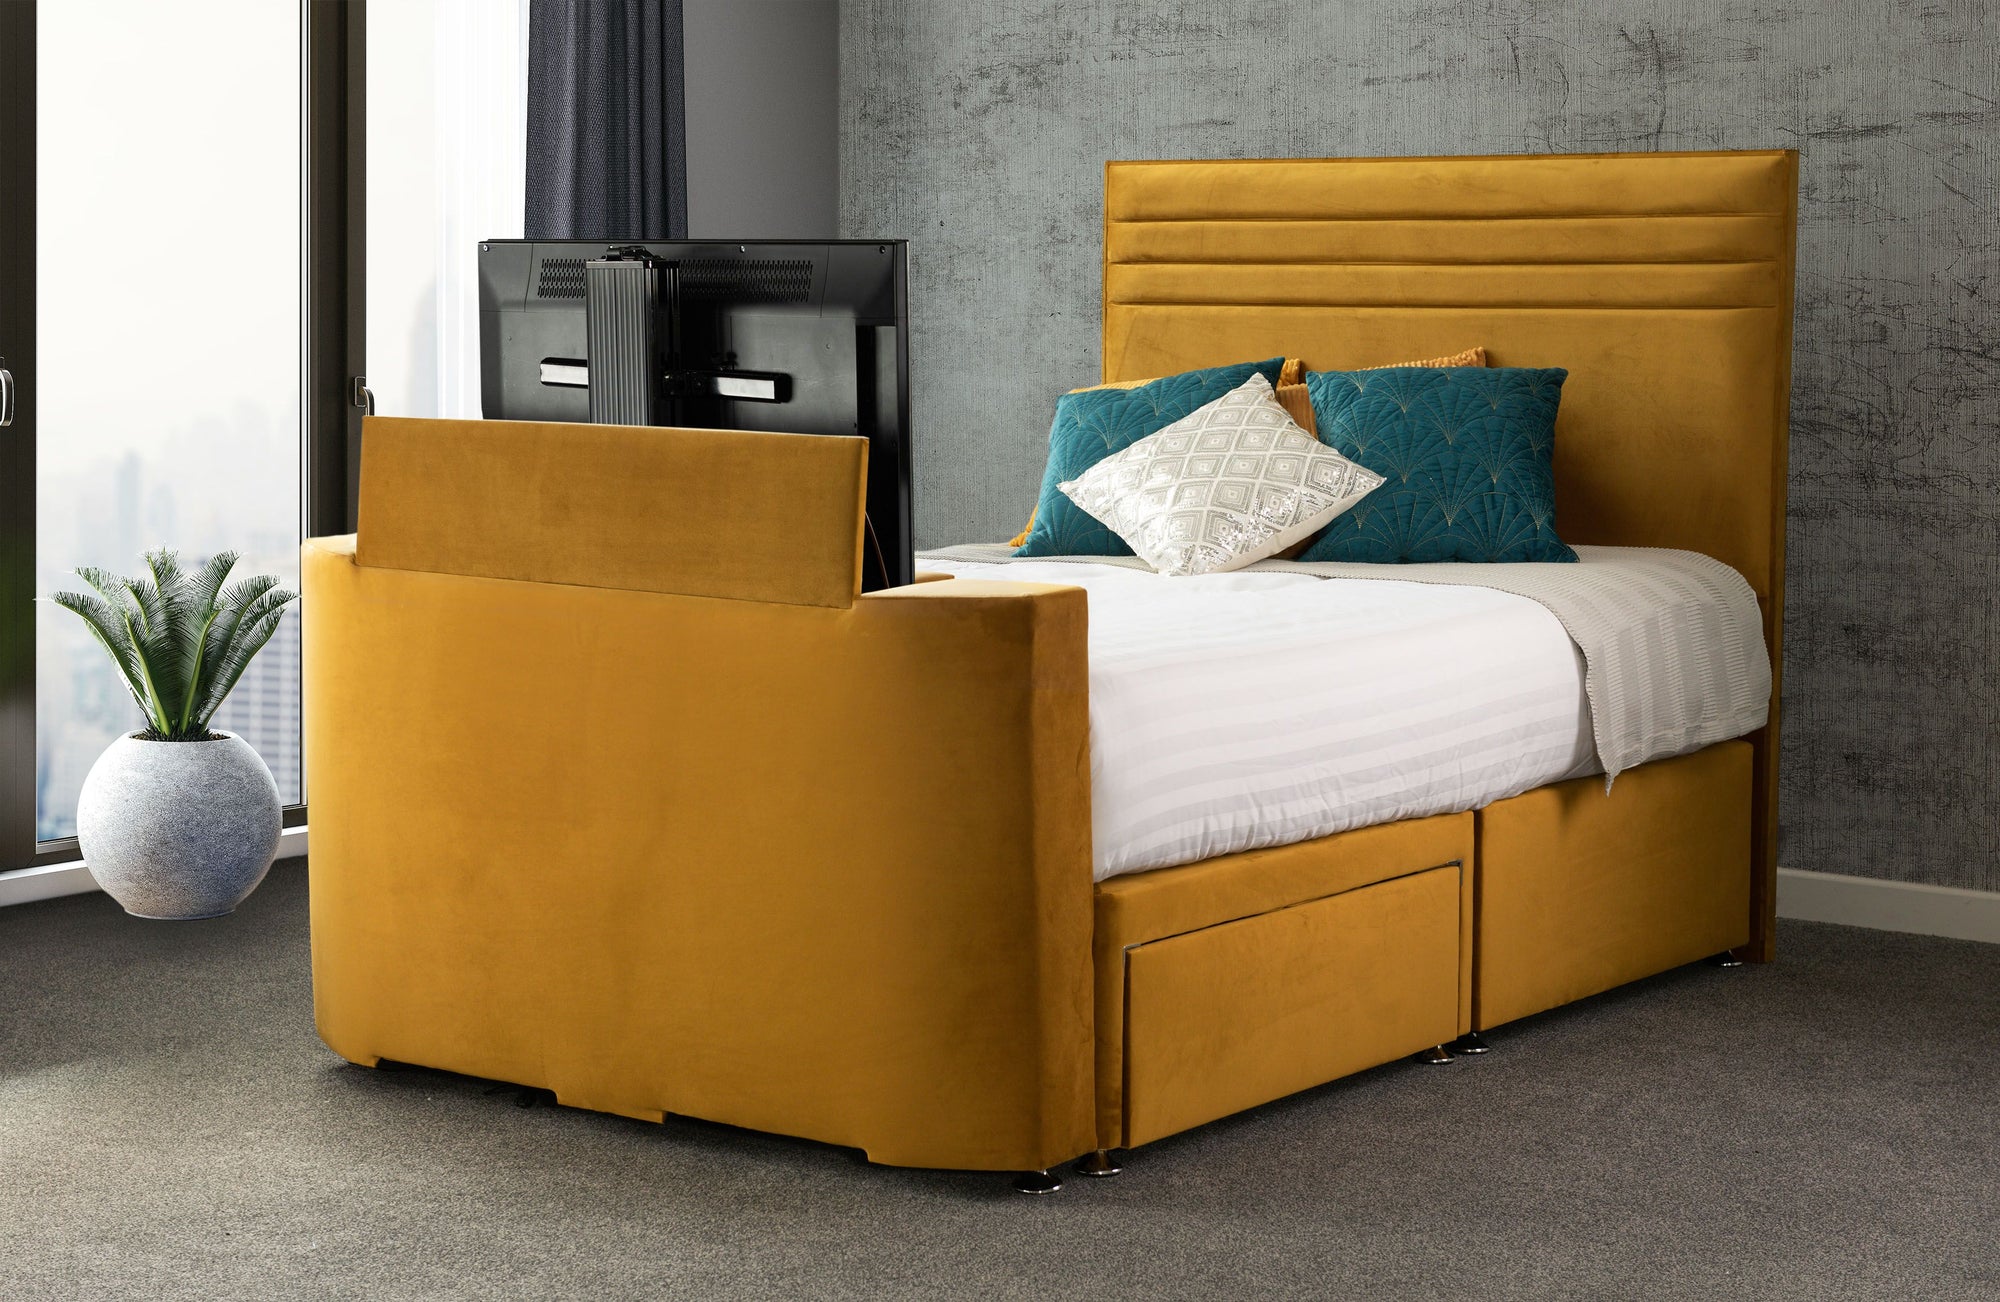 Sweet Dreams Vision Chic TV Bed - Beds on Legs Ltd